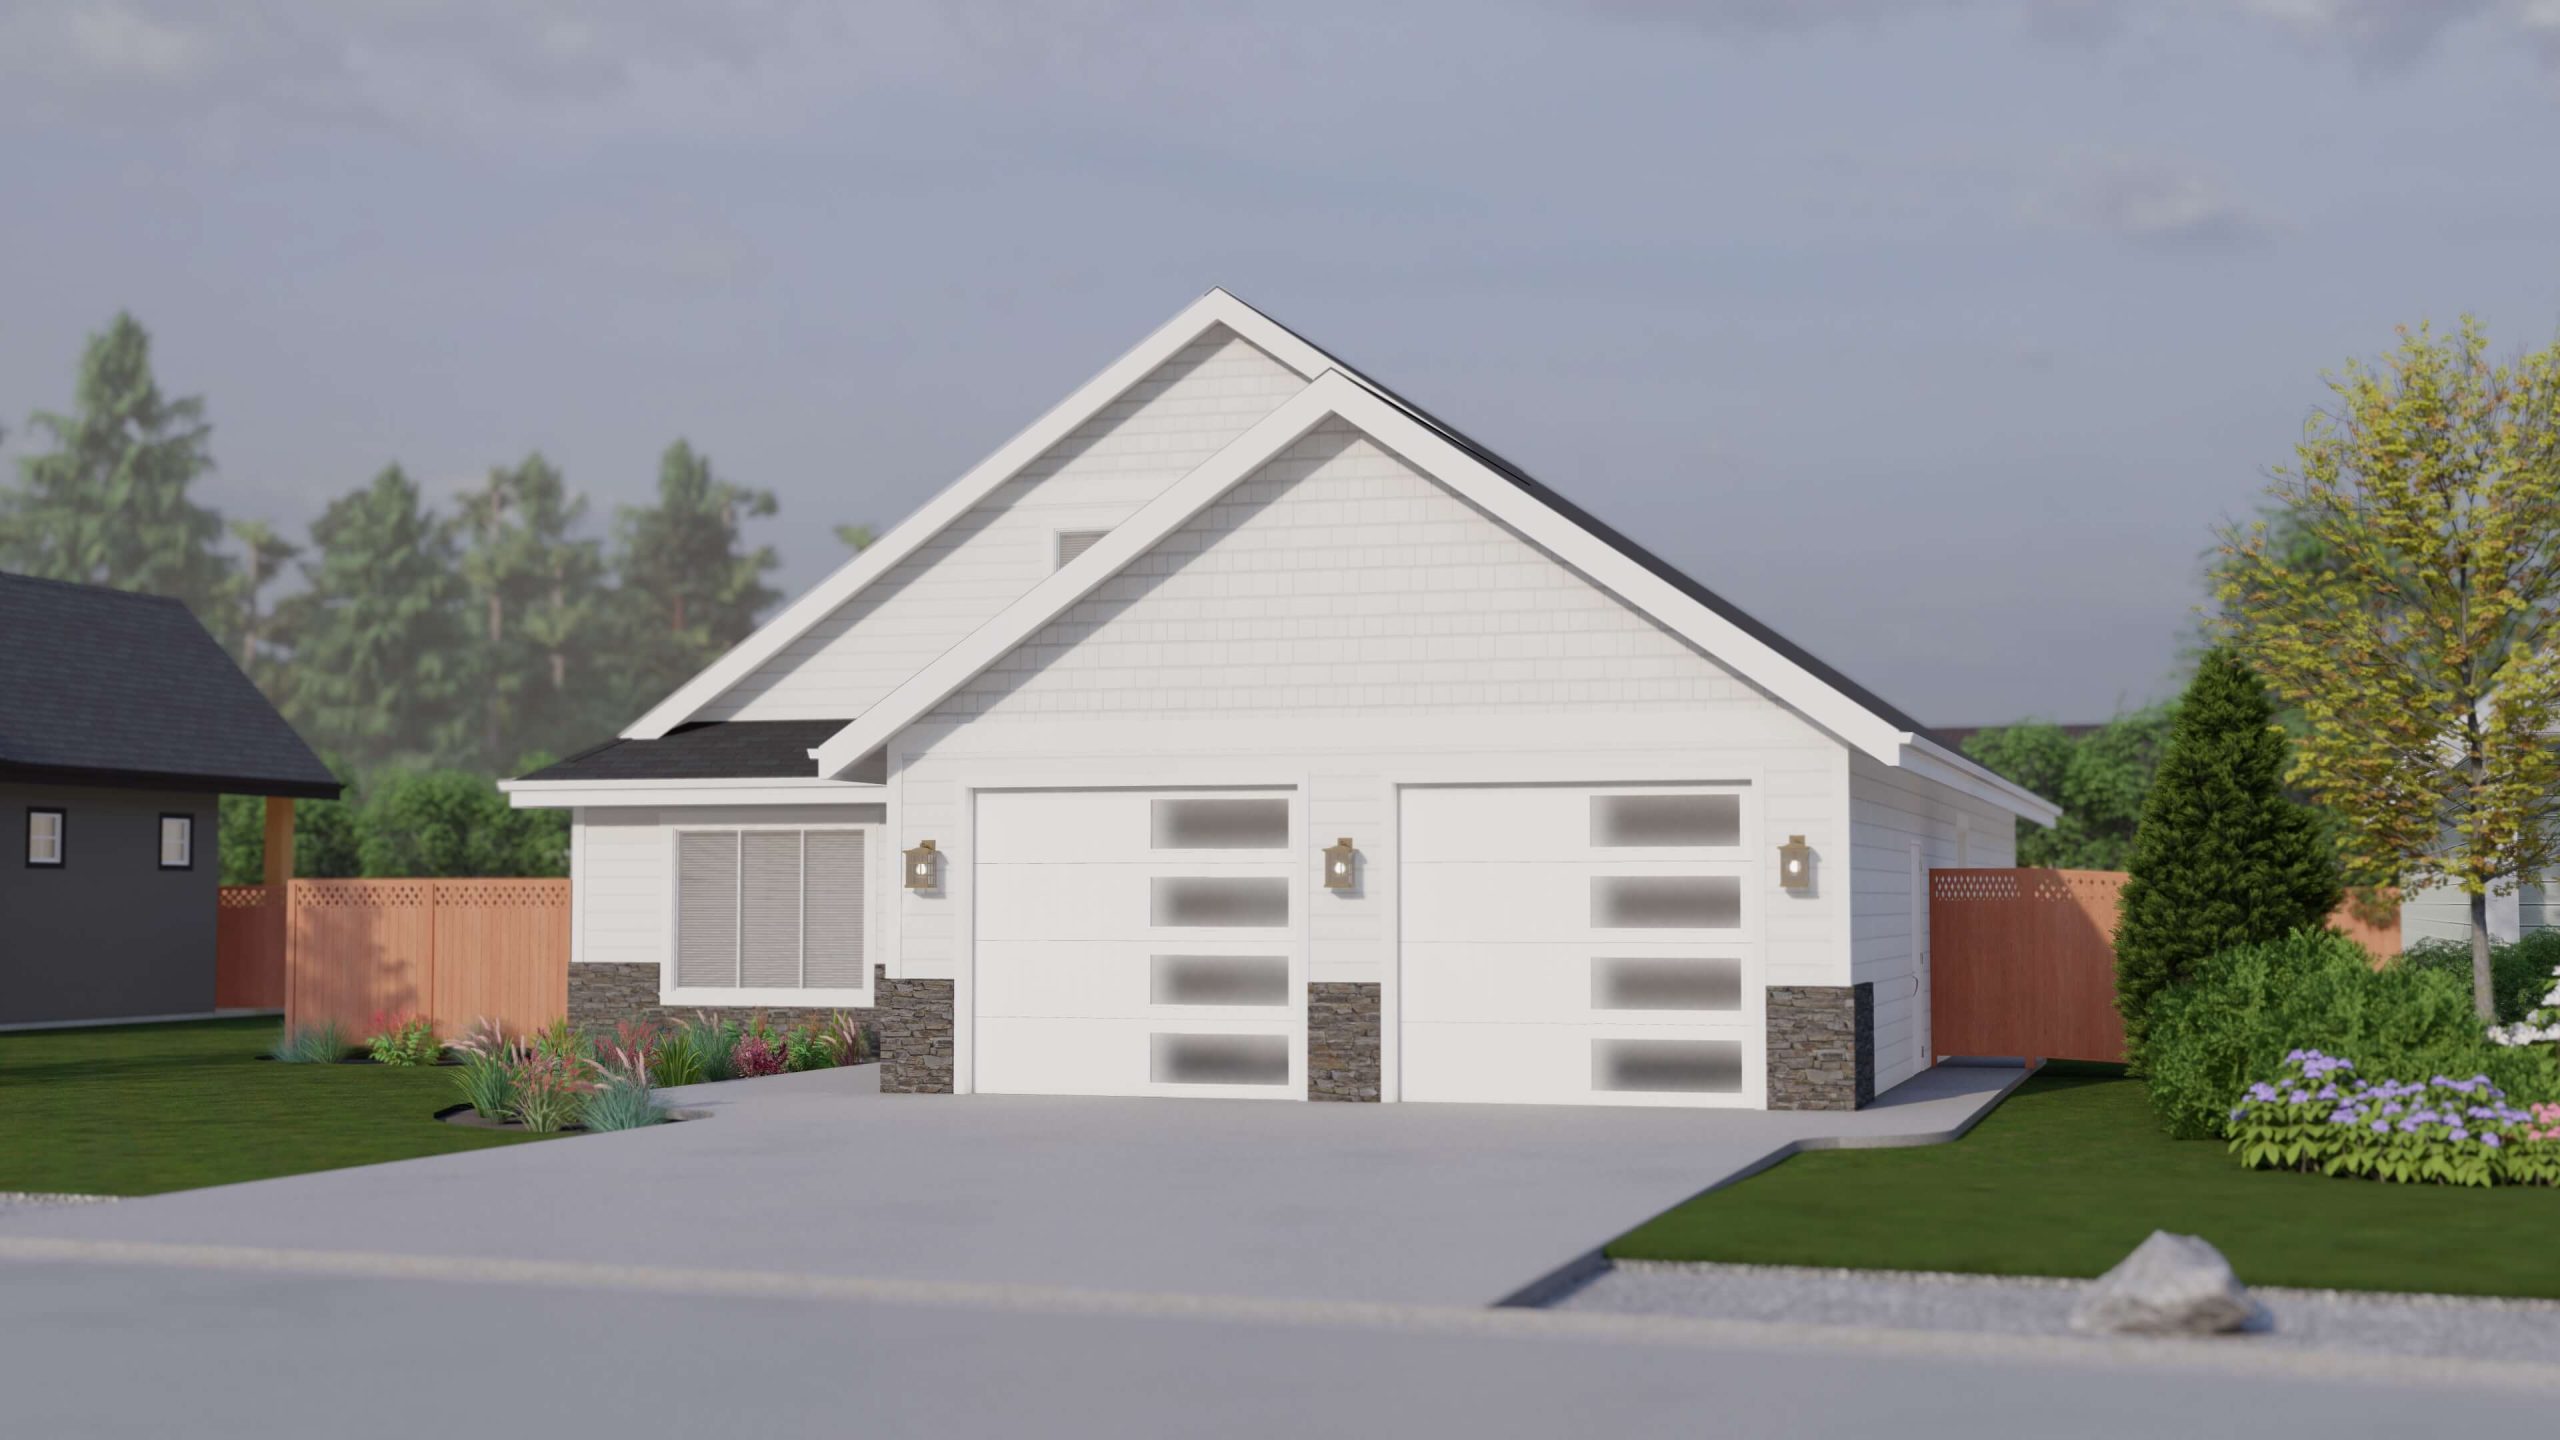 Front view of 1165 Robertson - rendition shows double garage.